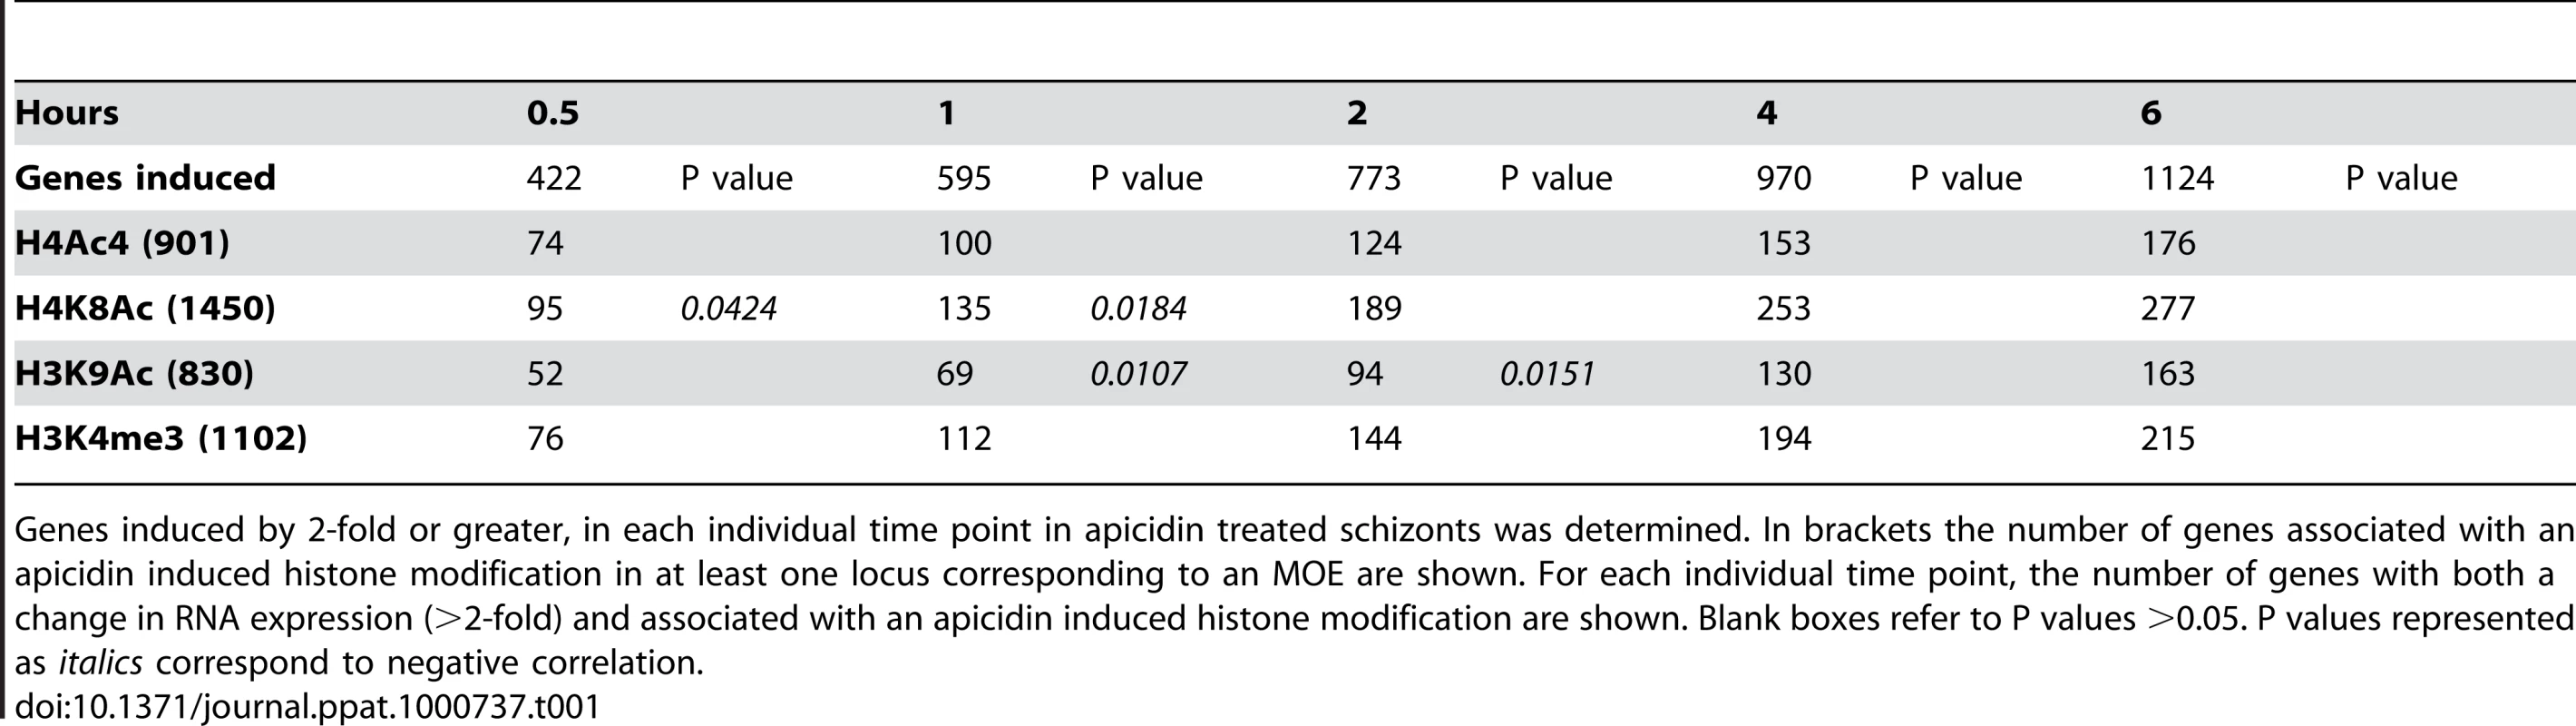 Association between the genetic loci with altered histone modifications and genes induced by apicidin.